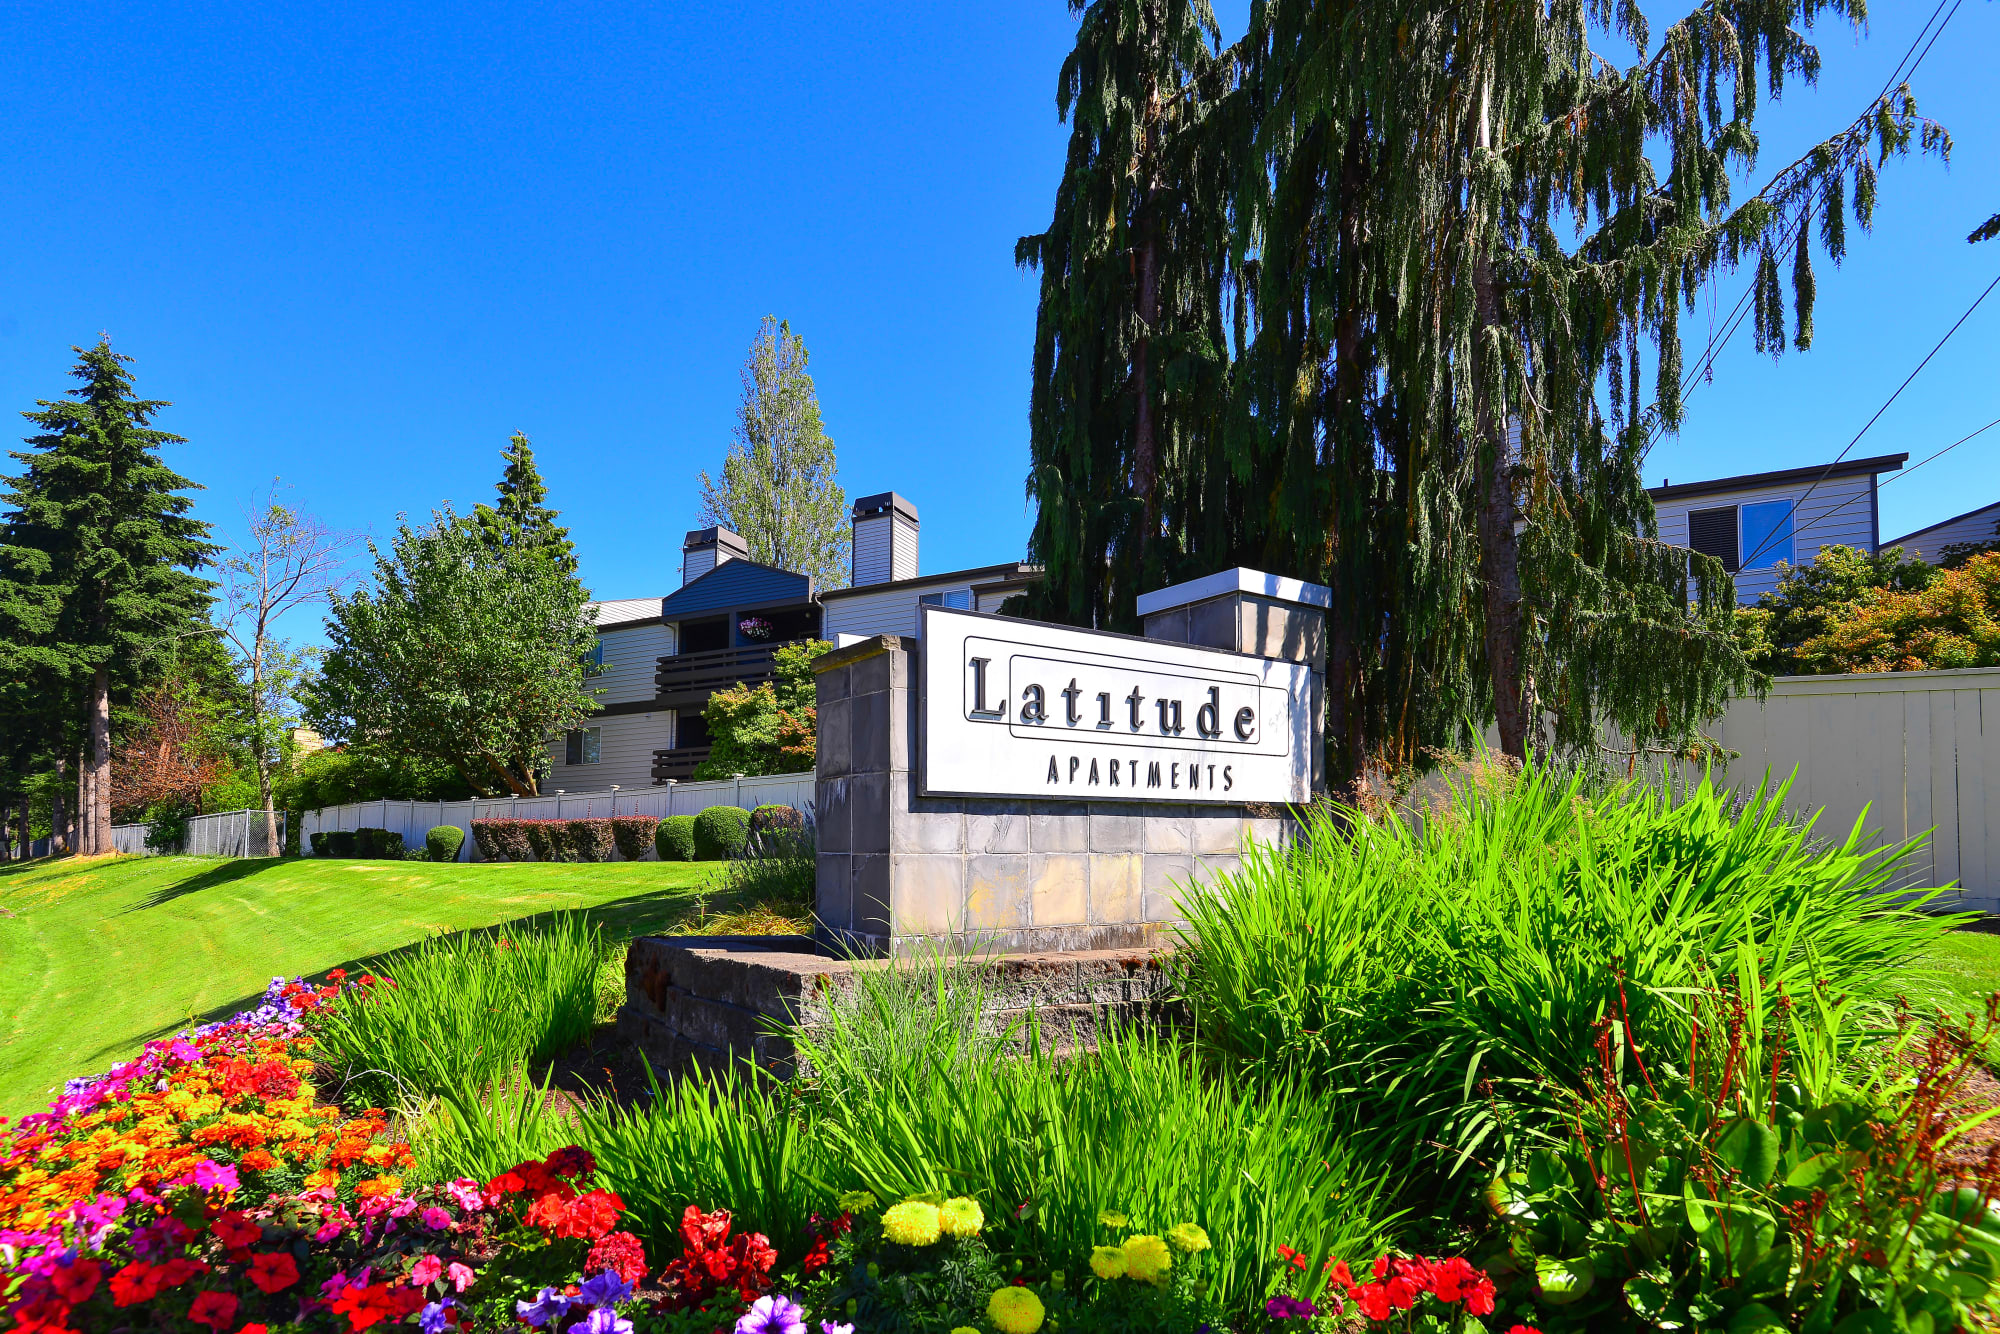 Monument sign and landscaping at Latitude Apartments in Everett, Washington